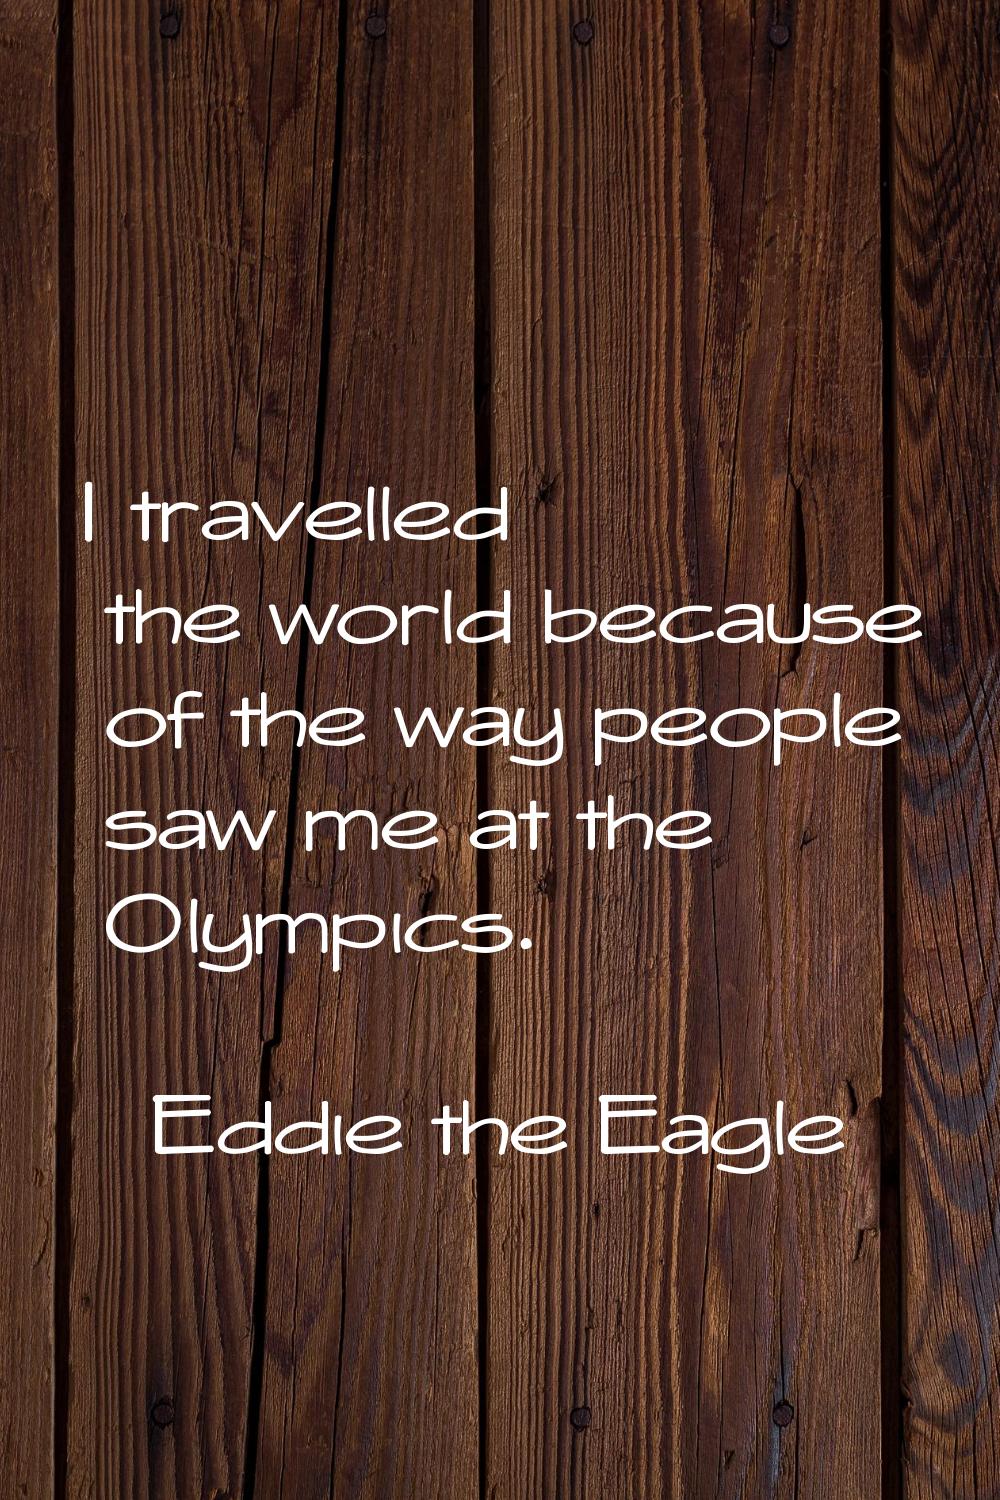 I travelled the world because of the way people saw me at the Olympics.